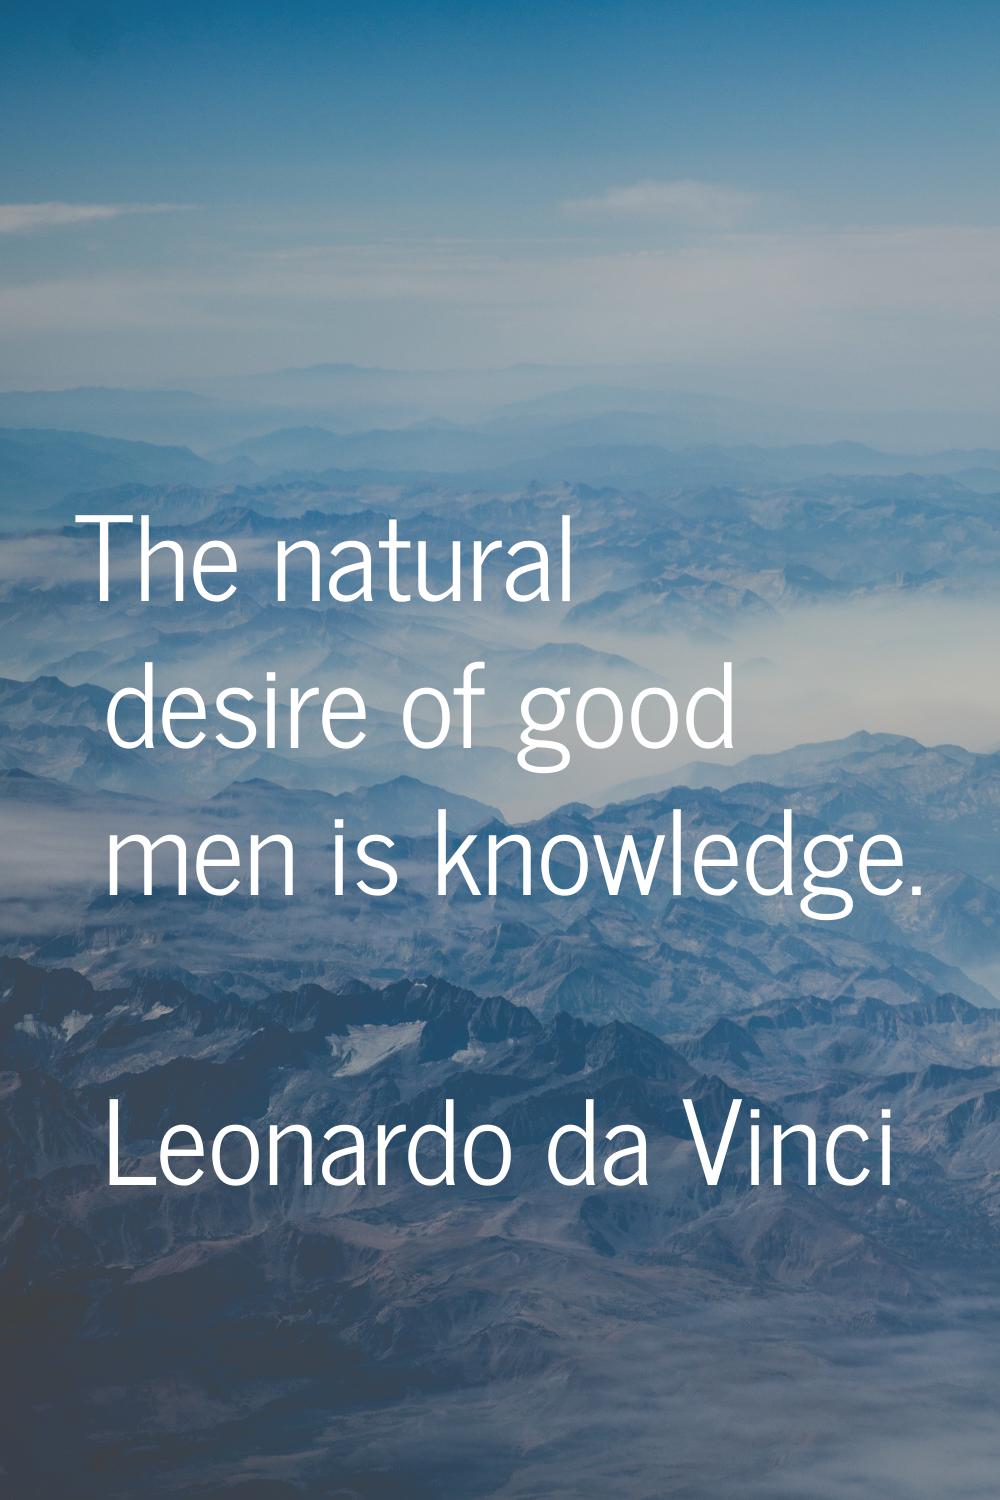 The natural desire of good men is knowledge.